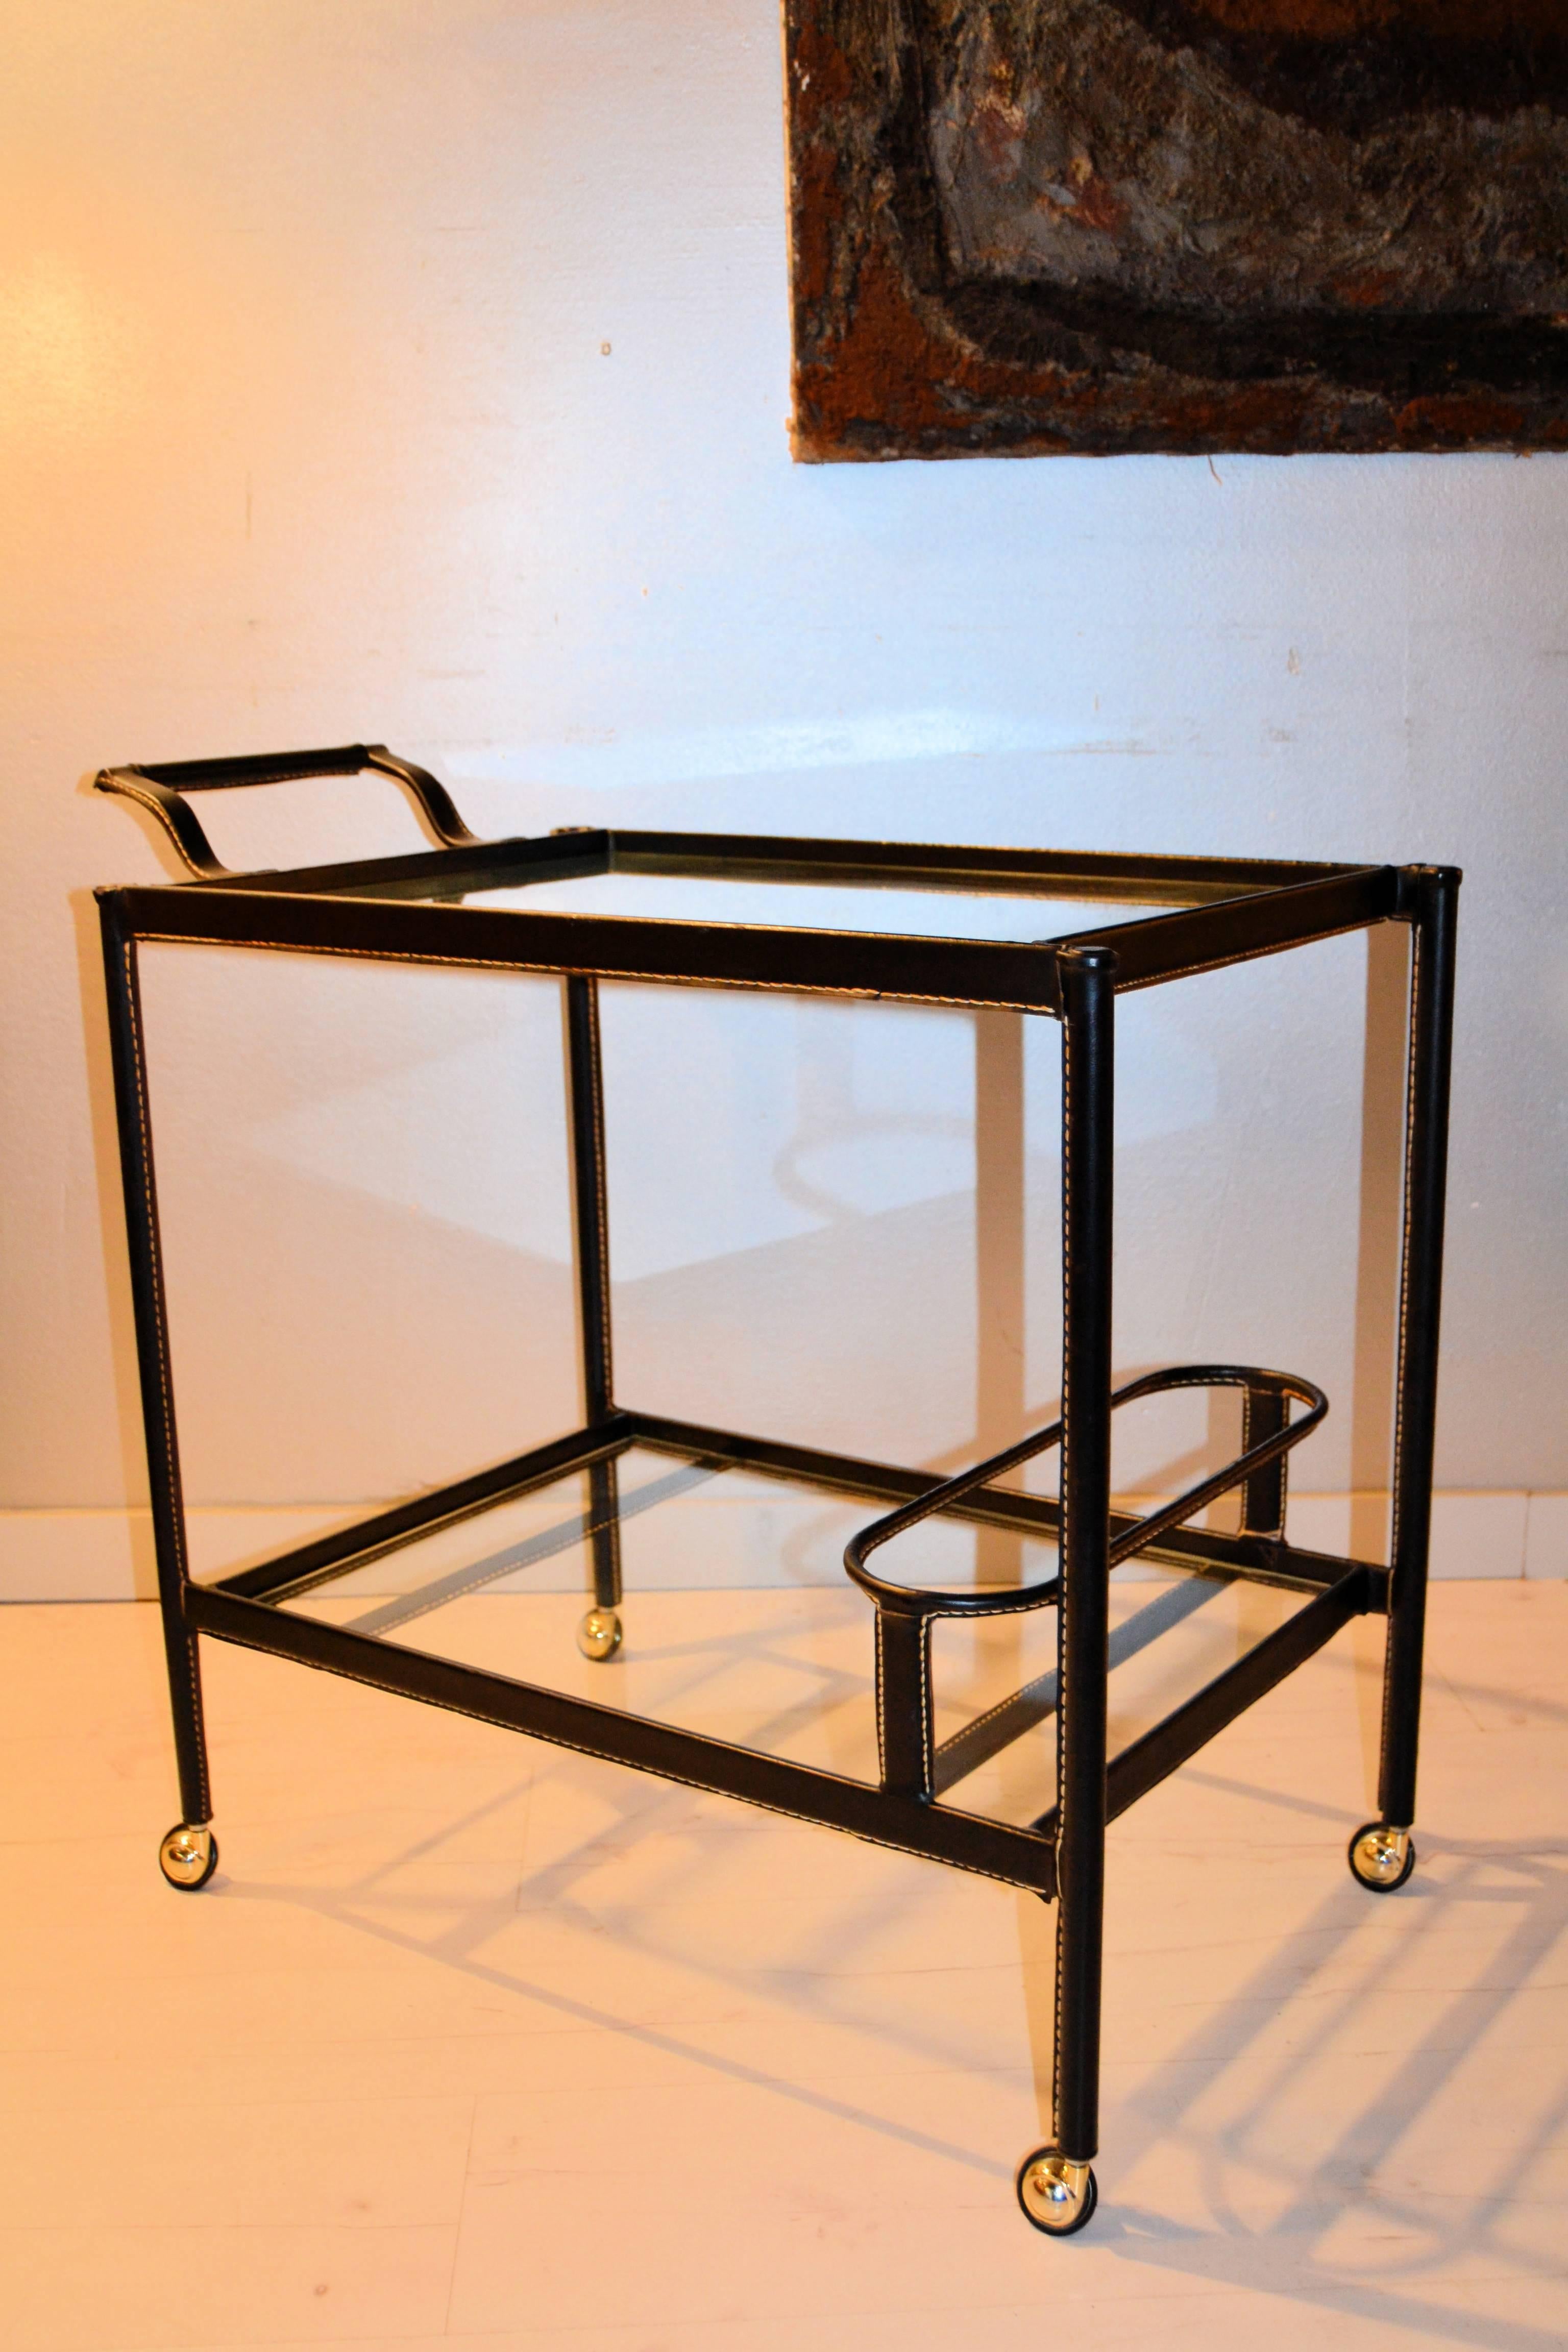 1950s Jacque Adnet black faux leather bar cart. Two glass shelf with a bottle compartment.
Accident in one of the legs as you can see in the photos.